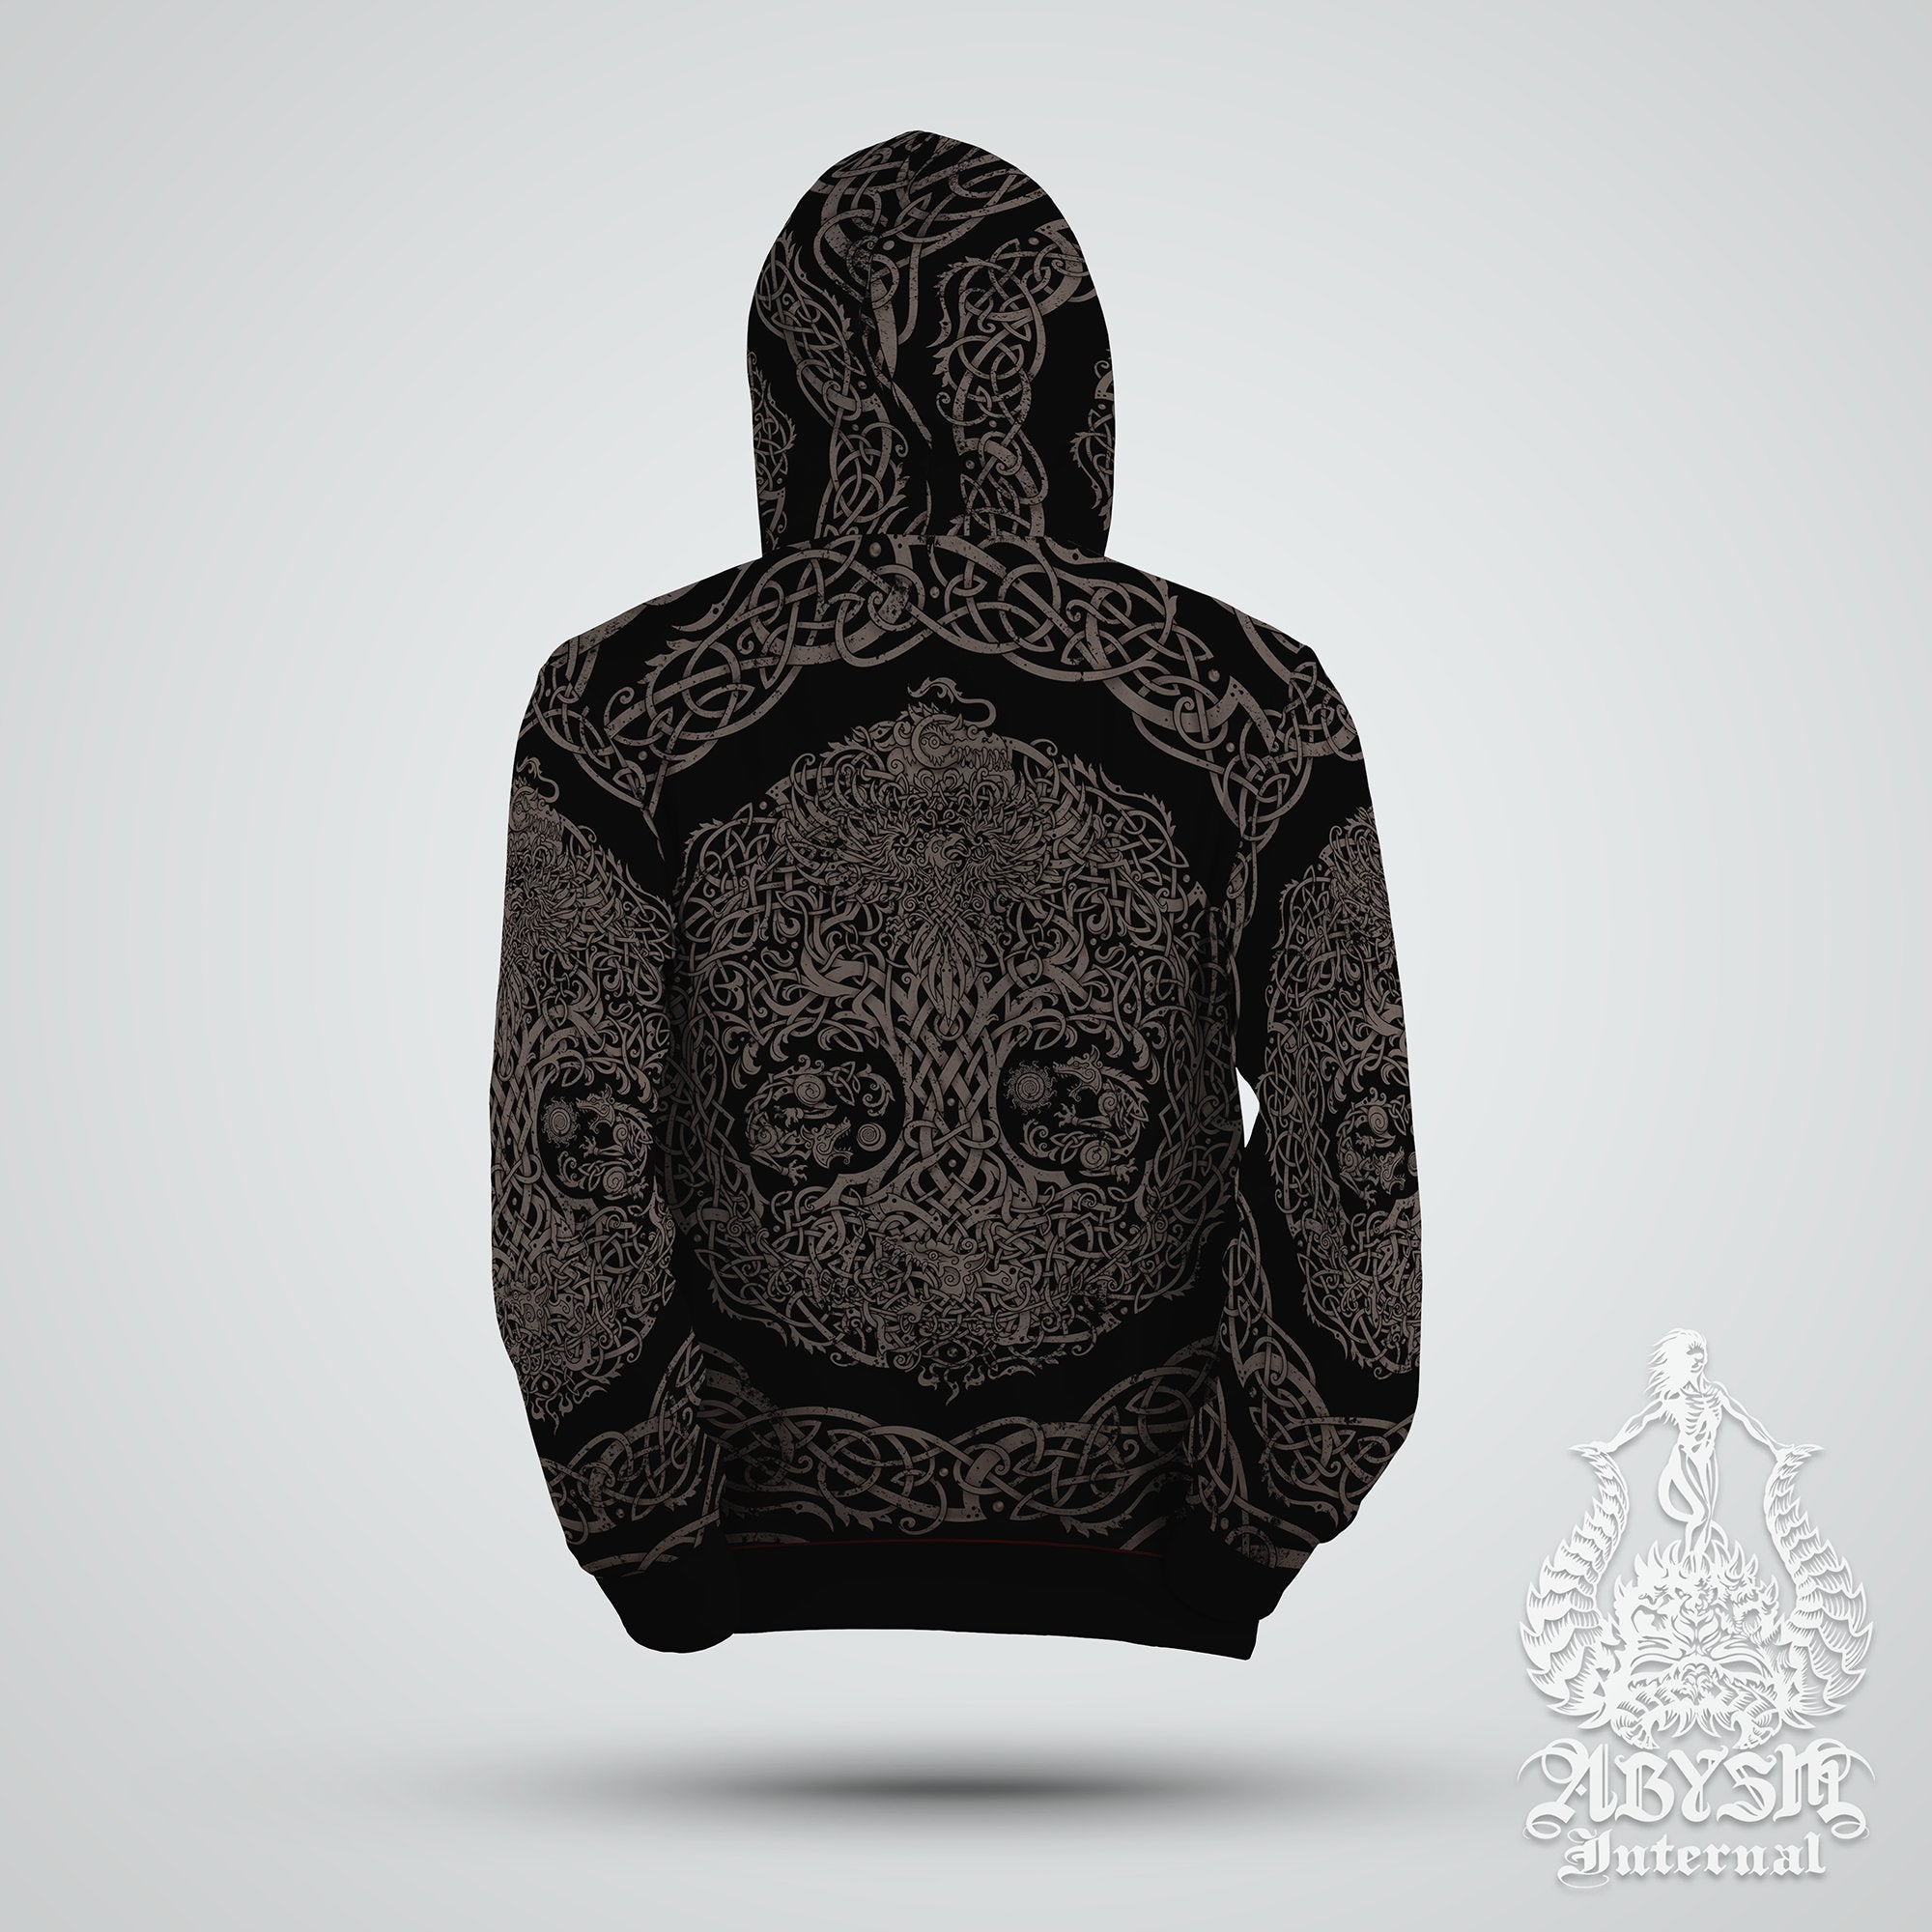 Yggdrasil Hoodie, Black and Grey Knotwork Pullover, Viking Streetwear, Pagan Outfit, Norse Art Sweater, Alternative Clothing, Unisex - Nordic Tree of Life, Grit - Abysm Internal